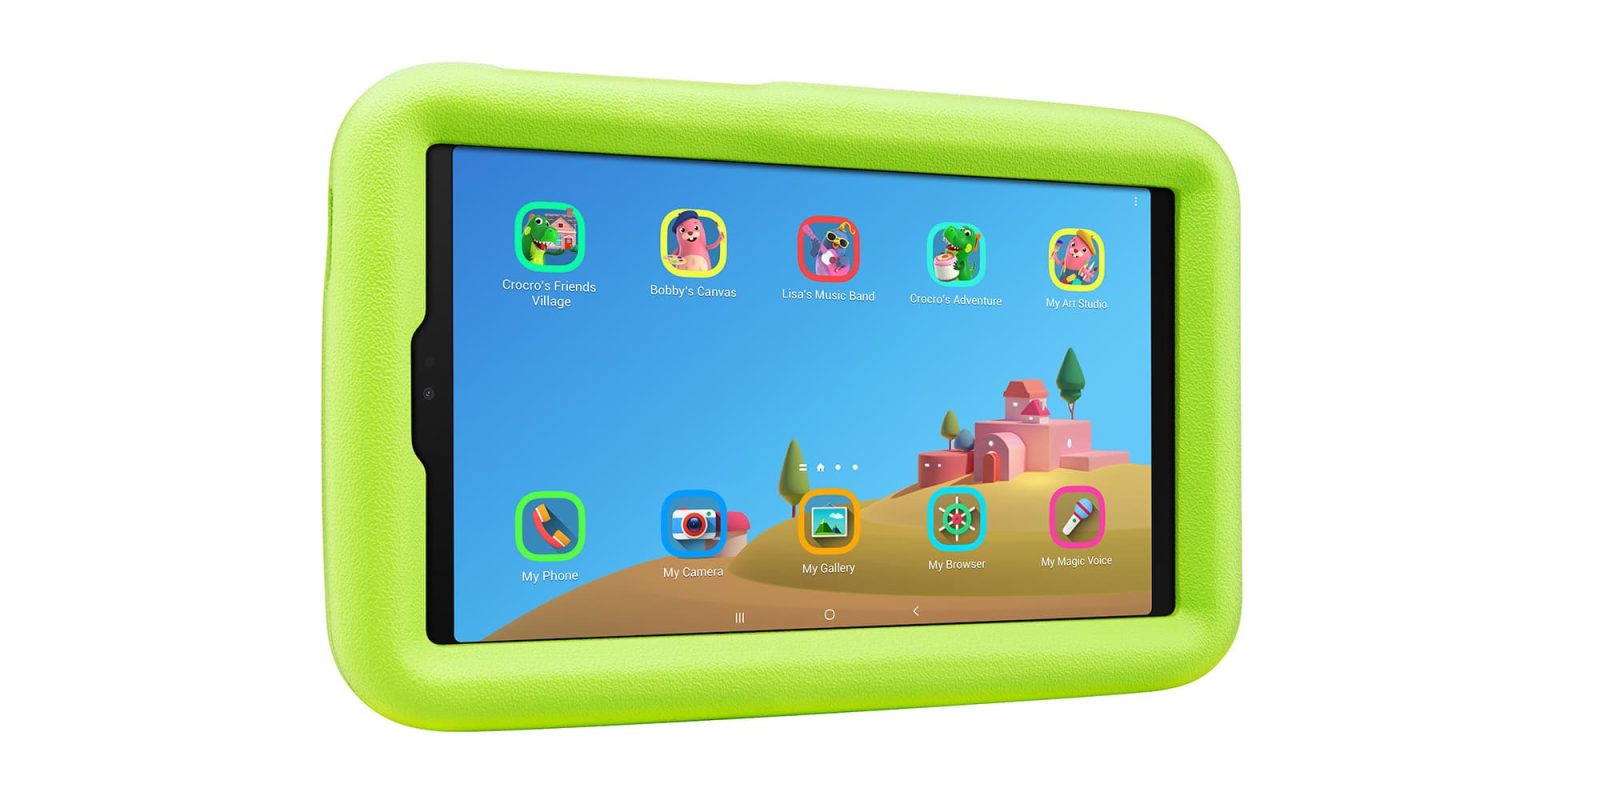 Galaxy Tab A7 Lite Kids Edition is a rugged Android tablet